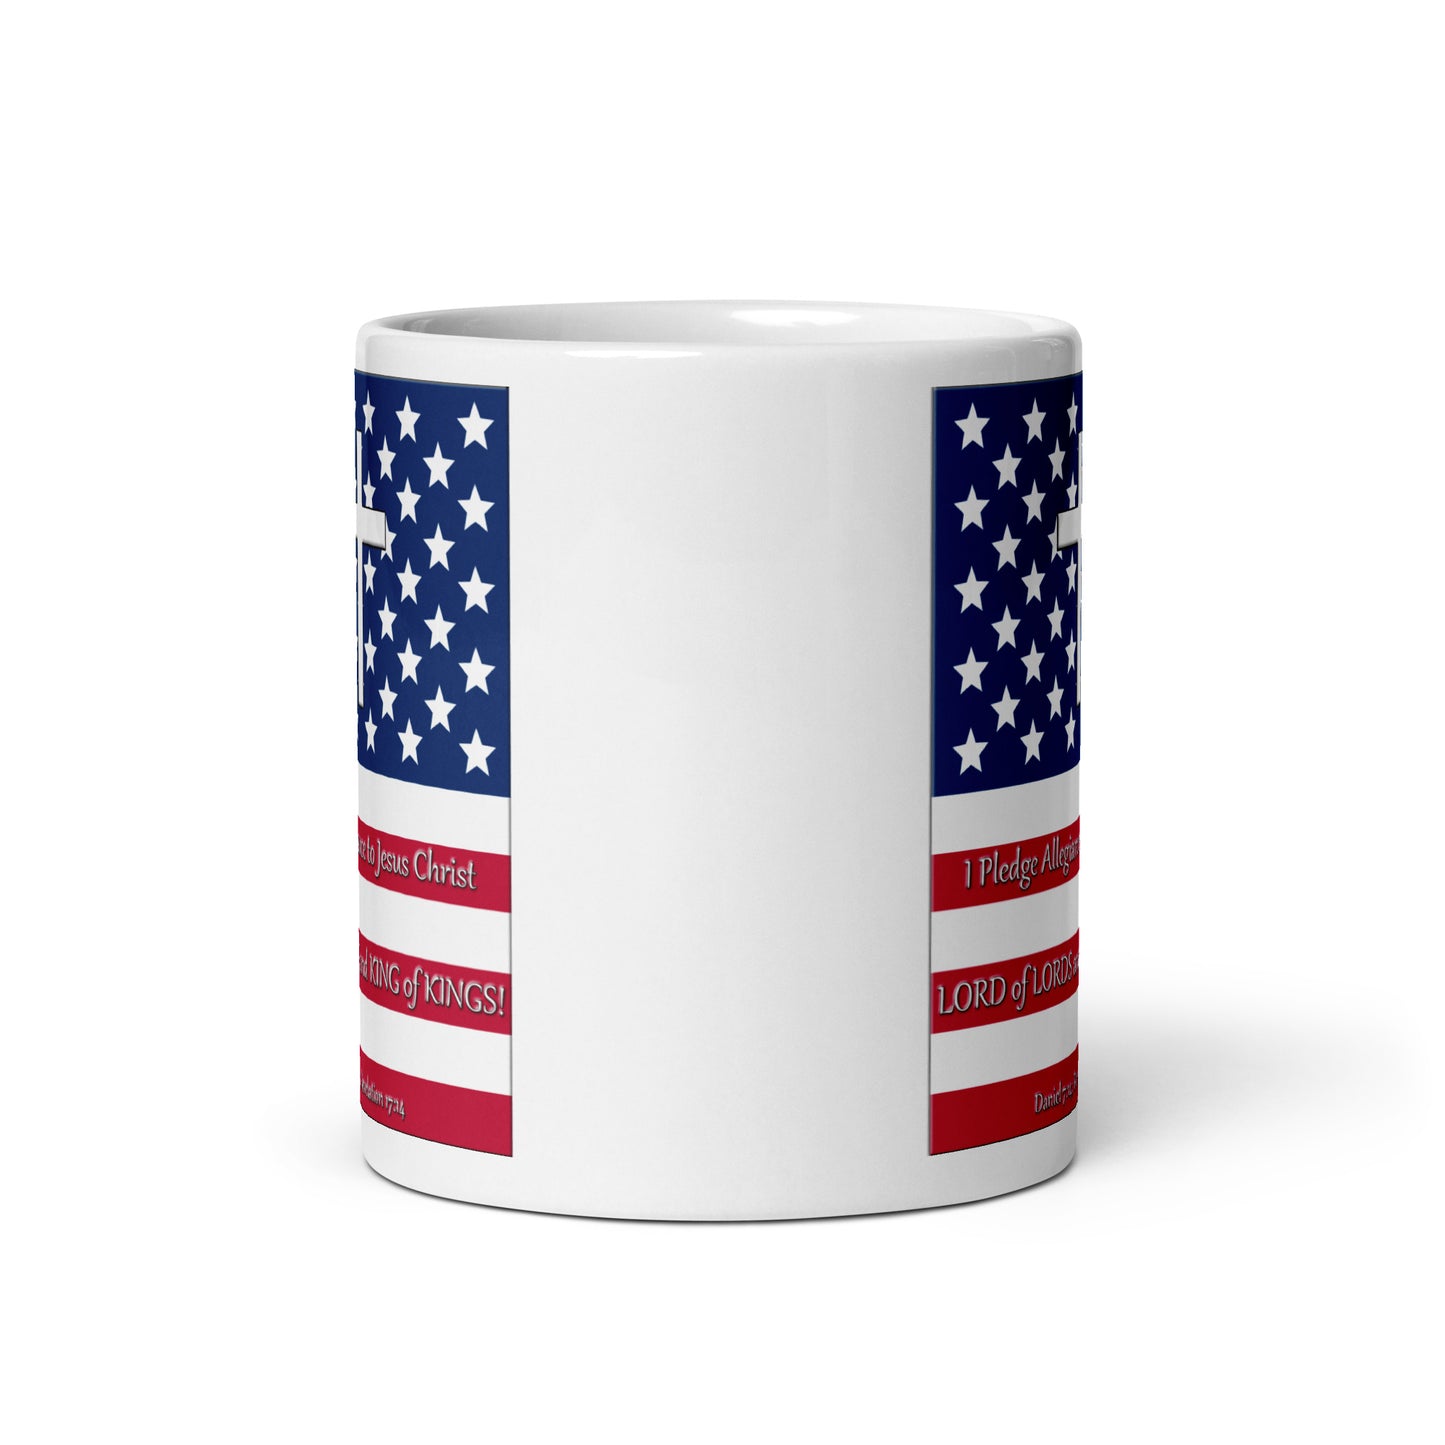 A019 Mug - White Glossy Ceramic Mug Featuring the Stars and Stripes, a Cross, and the Text “I Pledge Allegiance to Jesus Christ LORD of LORDS and KING of KINGS!”